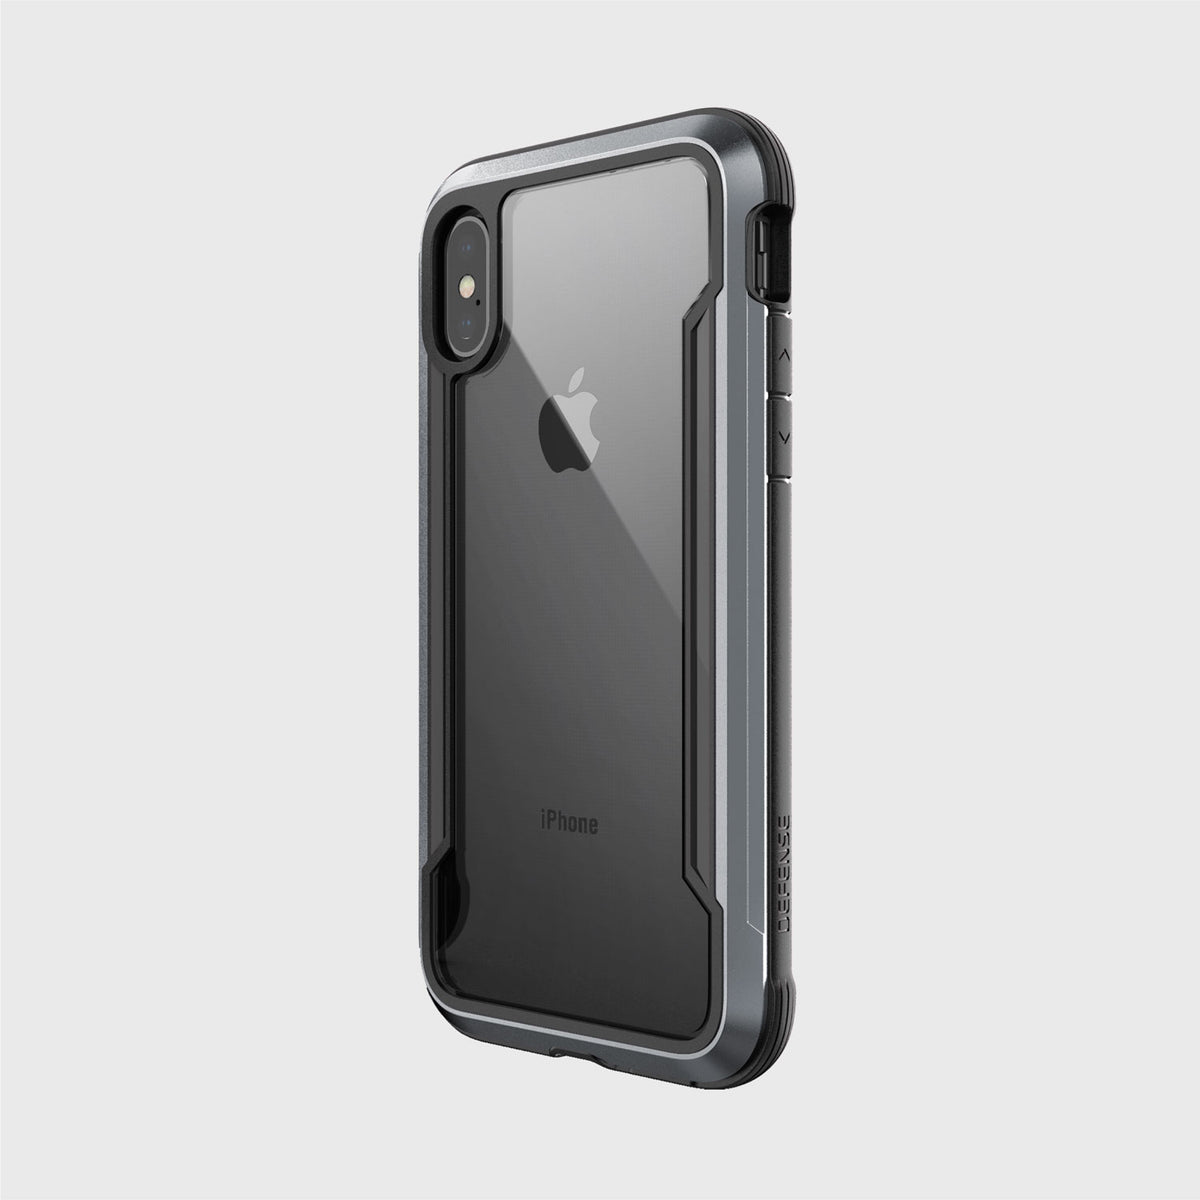 The Raptic SHIELD case for iPhone XS Max provides exceptional drop protection with its rear view design.